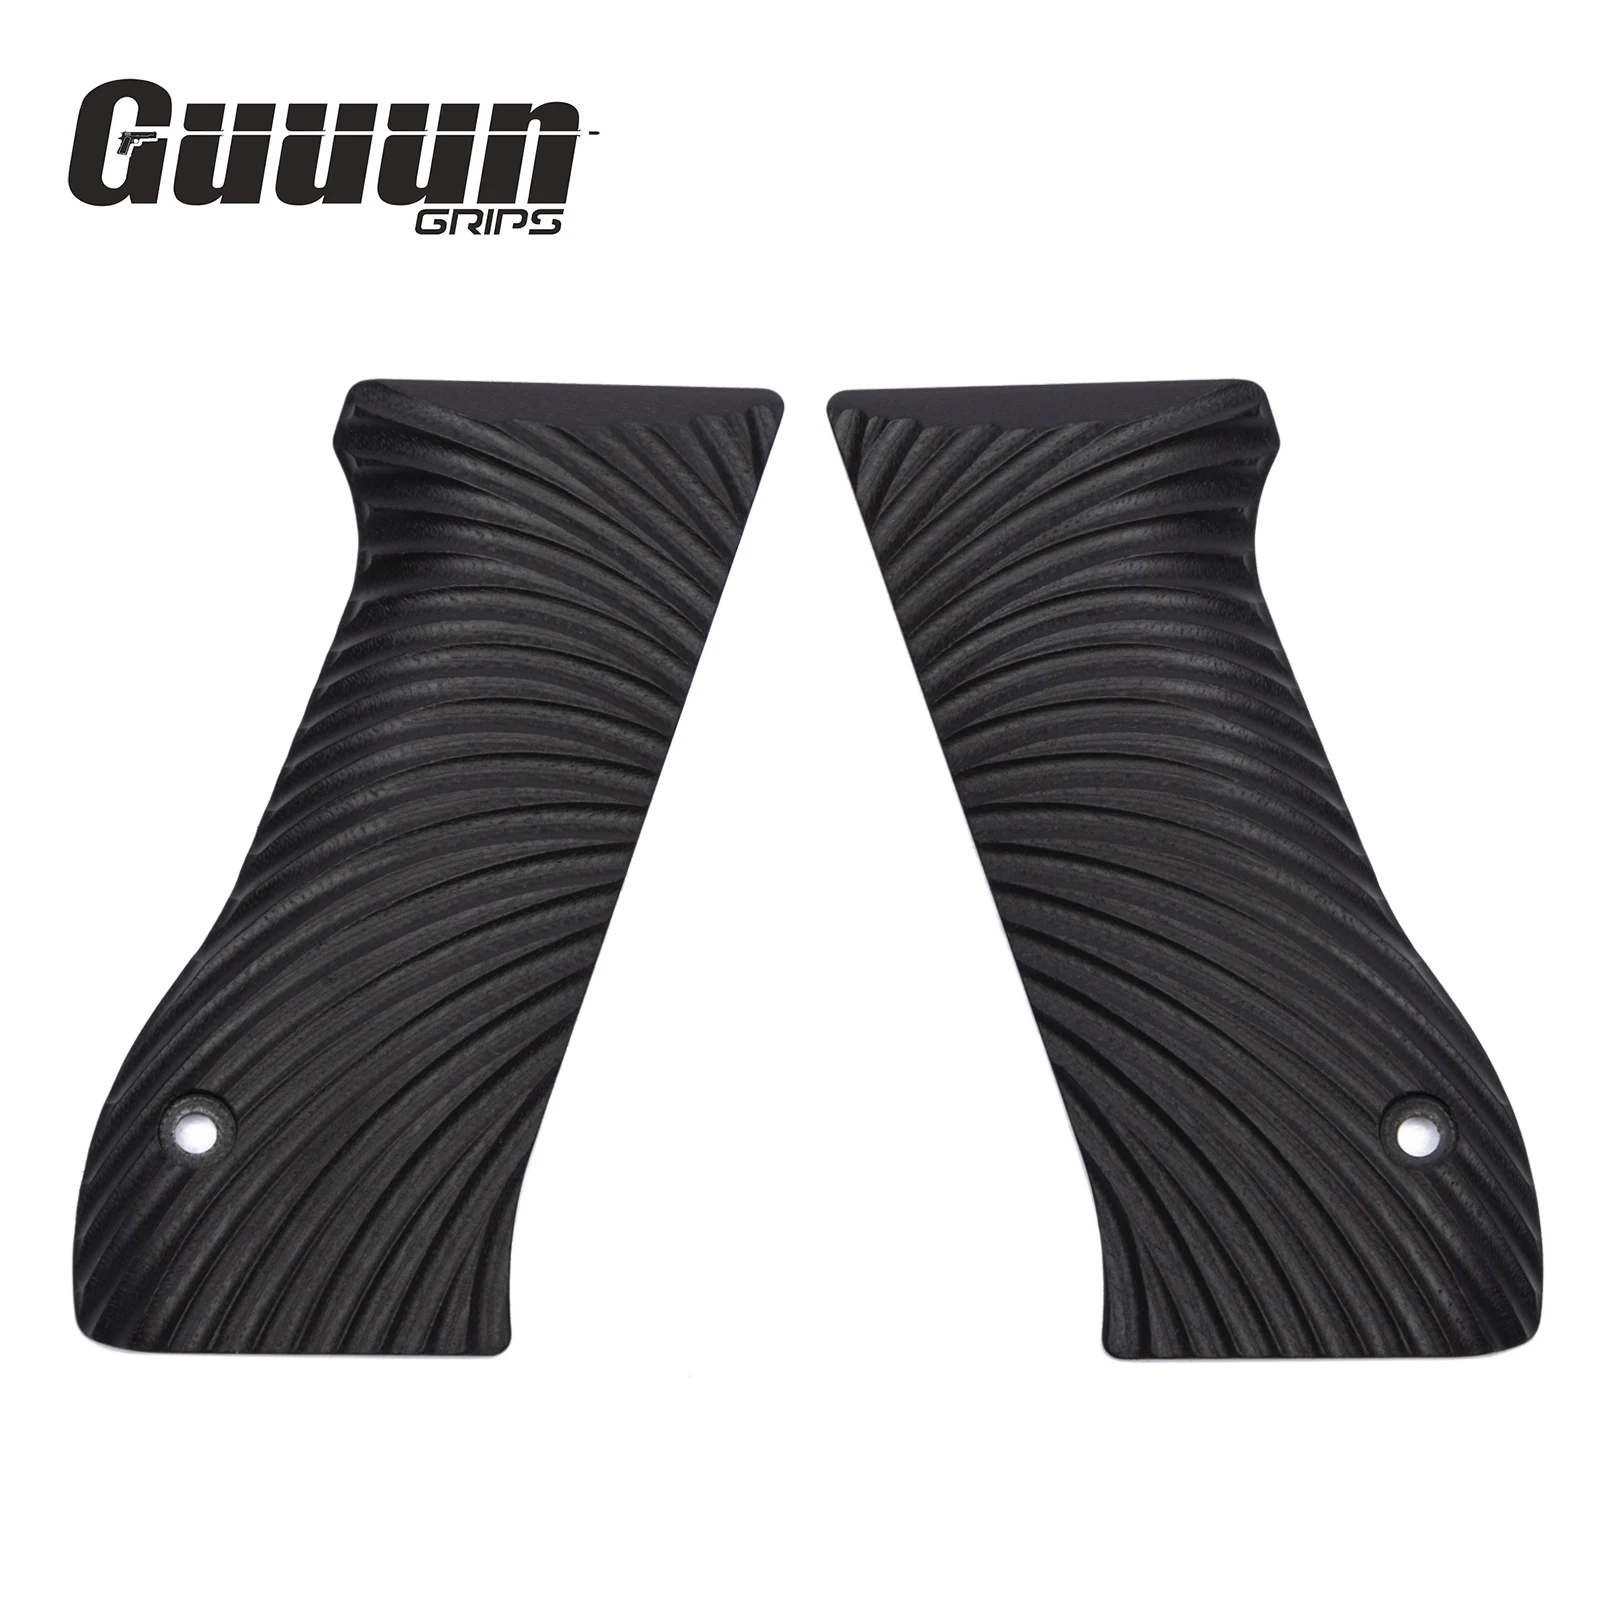 

Guuun G10 Grips For Jericho 941 F9 OPS Sunburst Texture - 5 Color Options